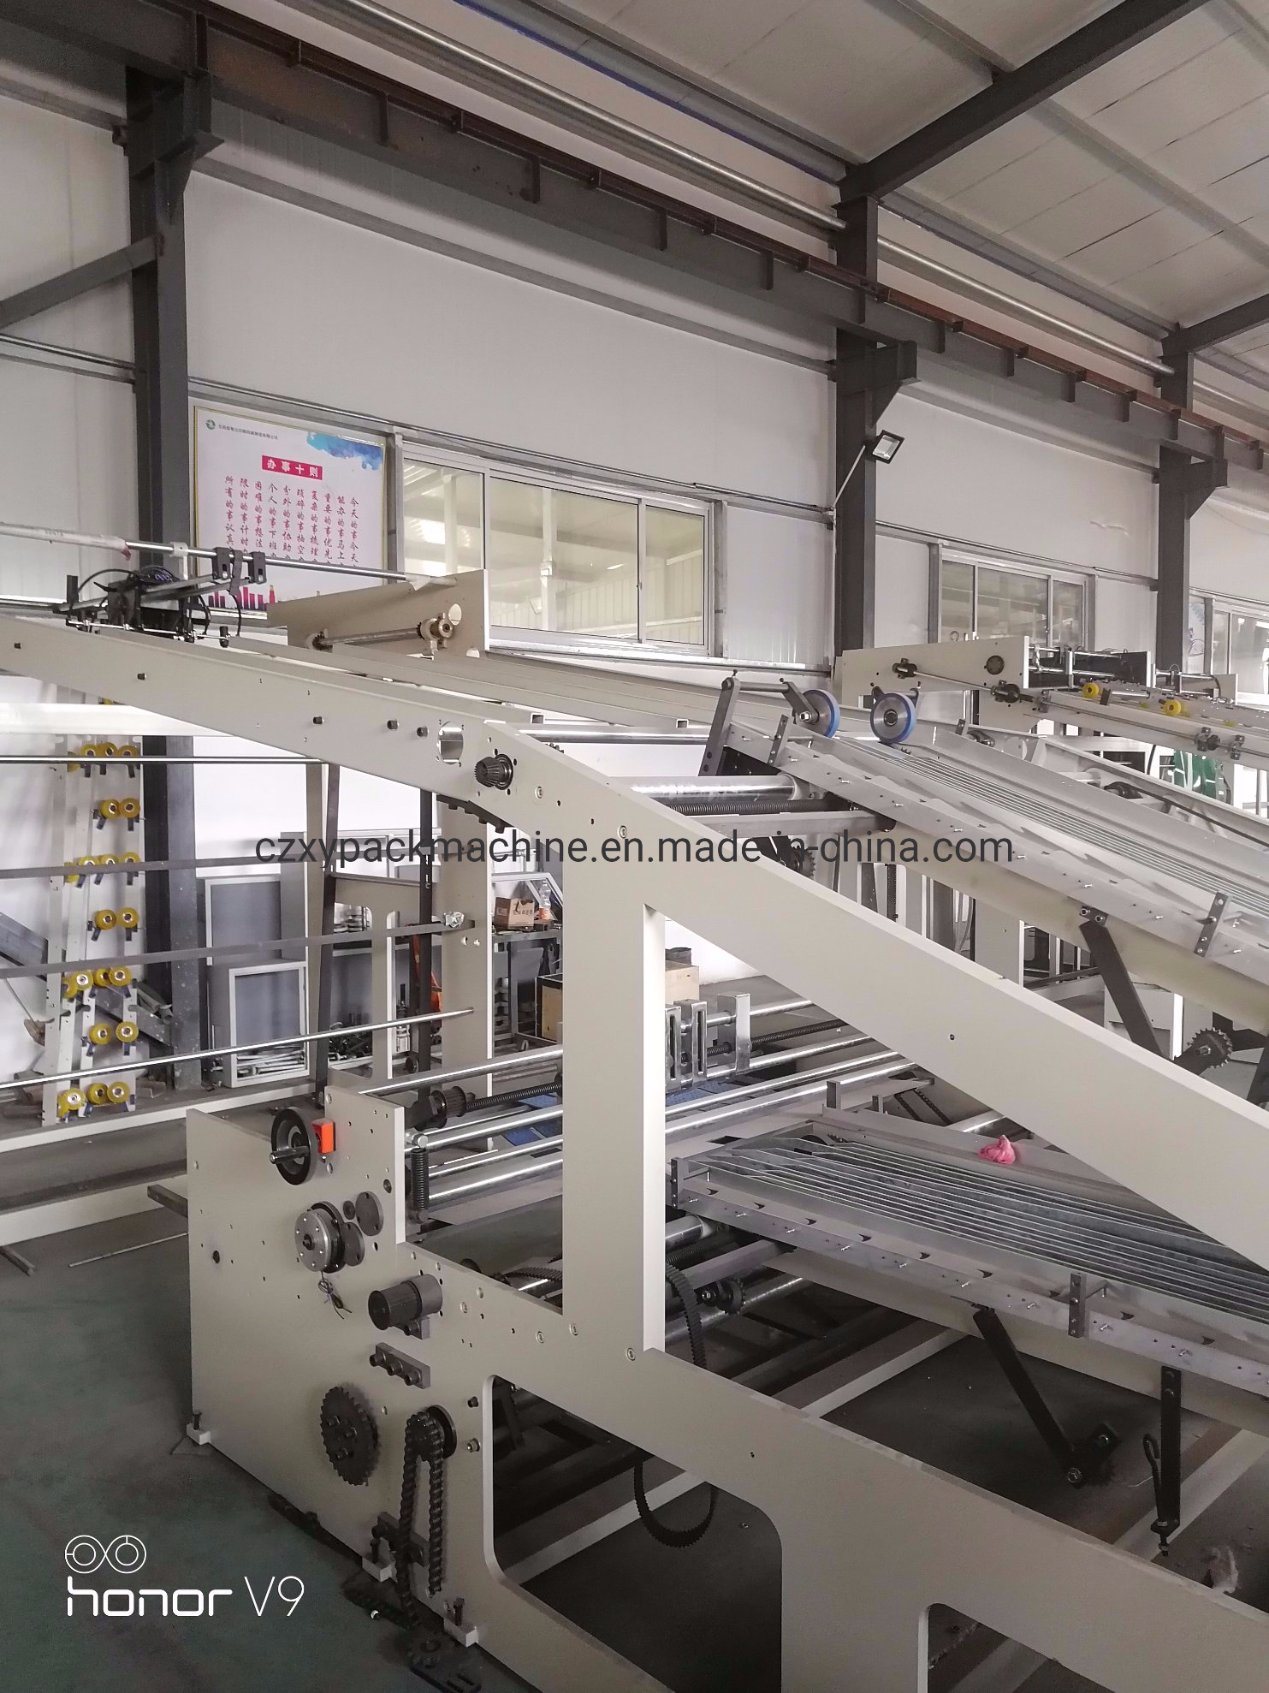 3/5ply Flute Laminator Pasting Machine for Colorful Corrugated Box Making